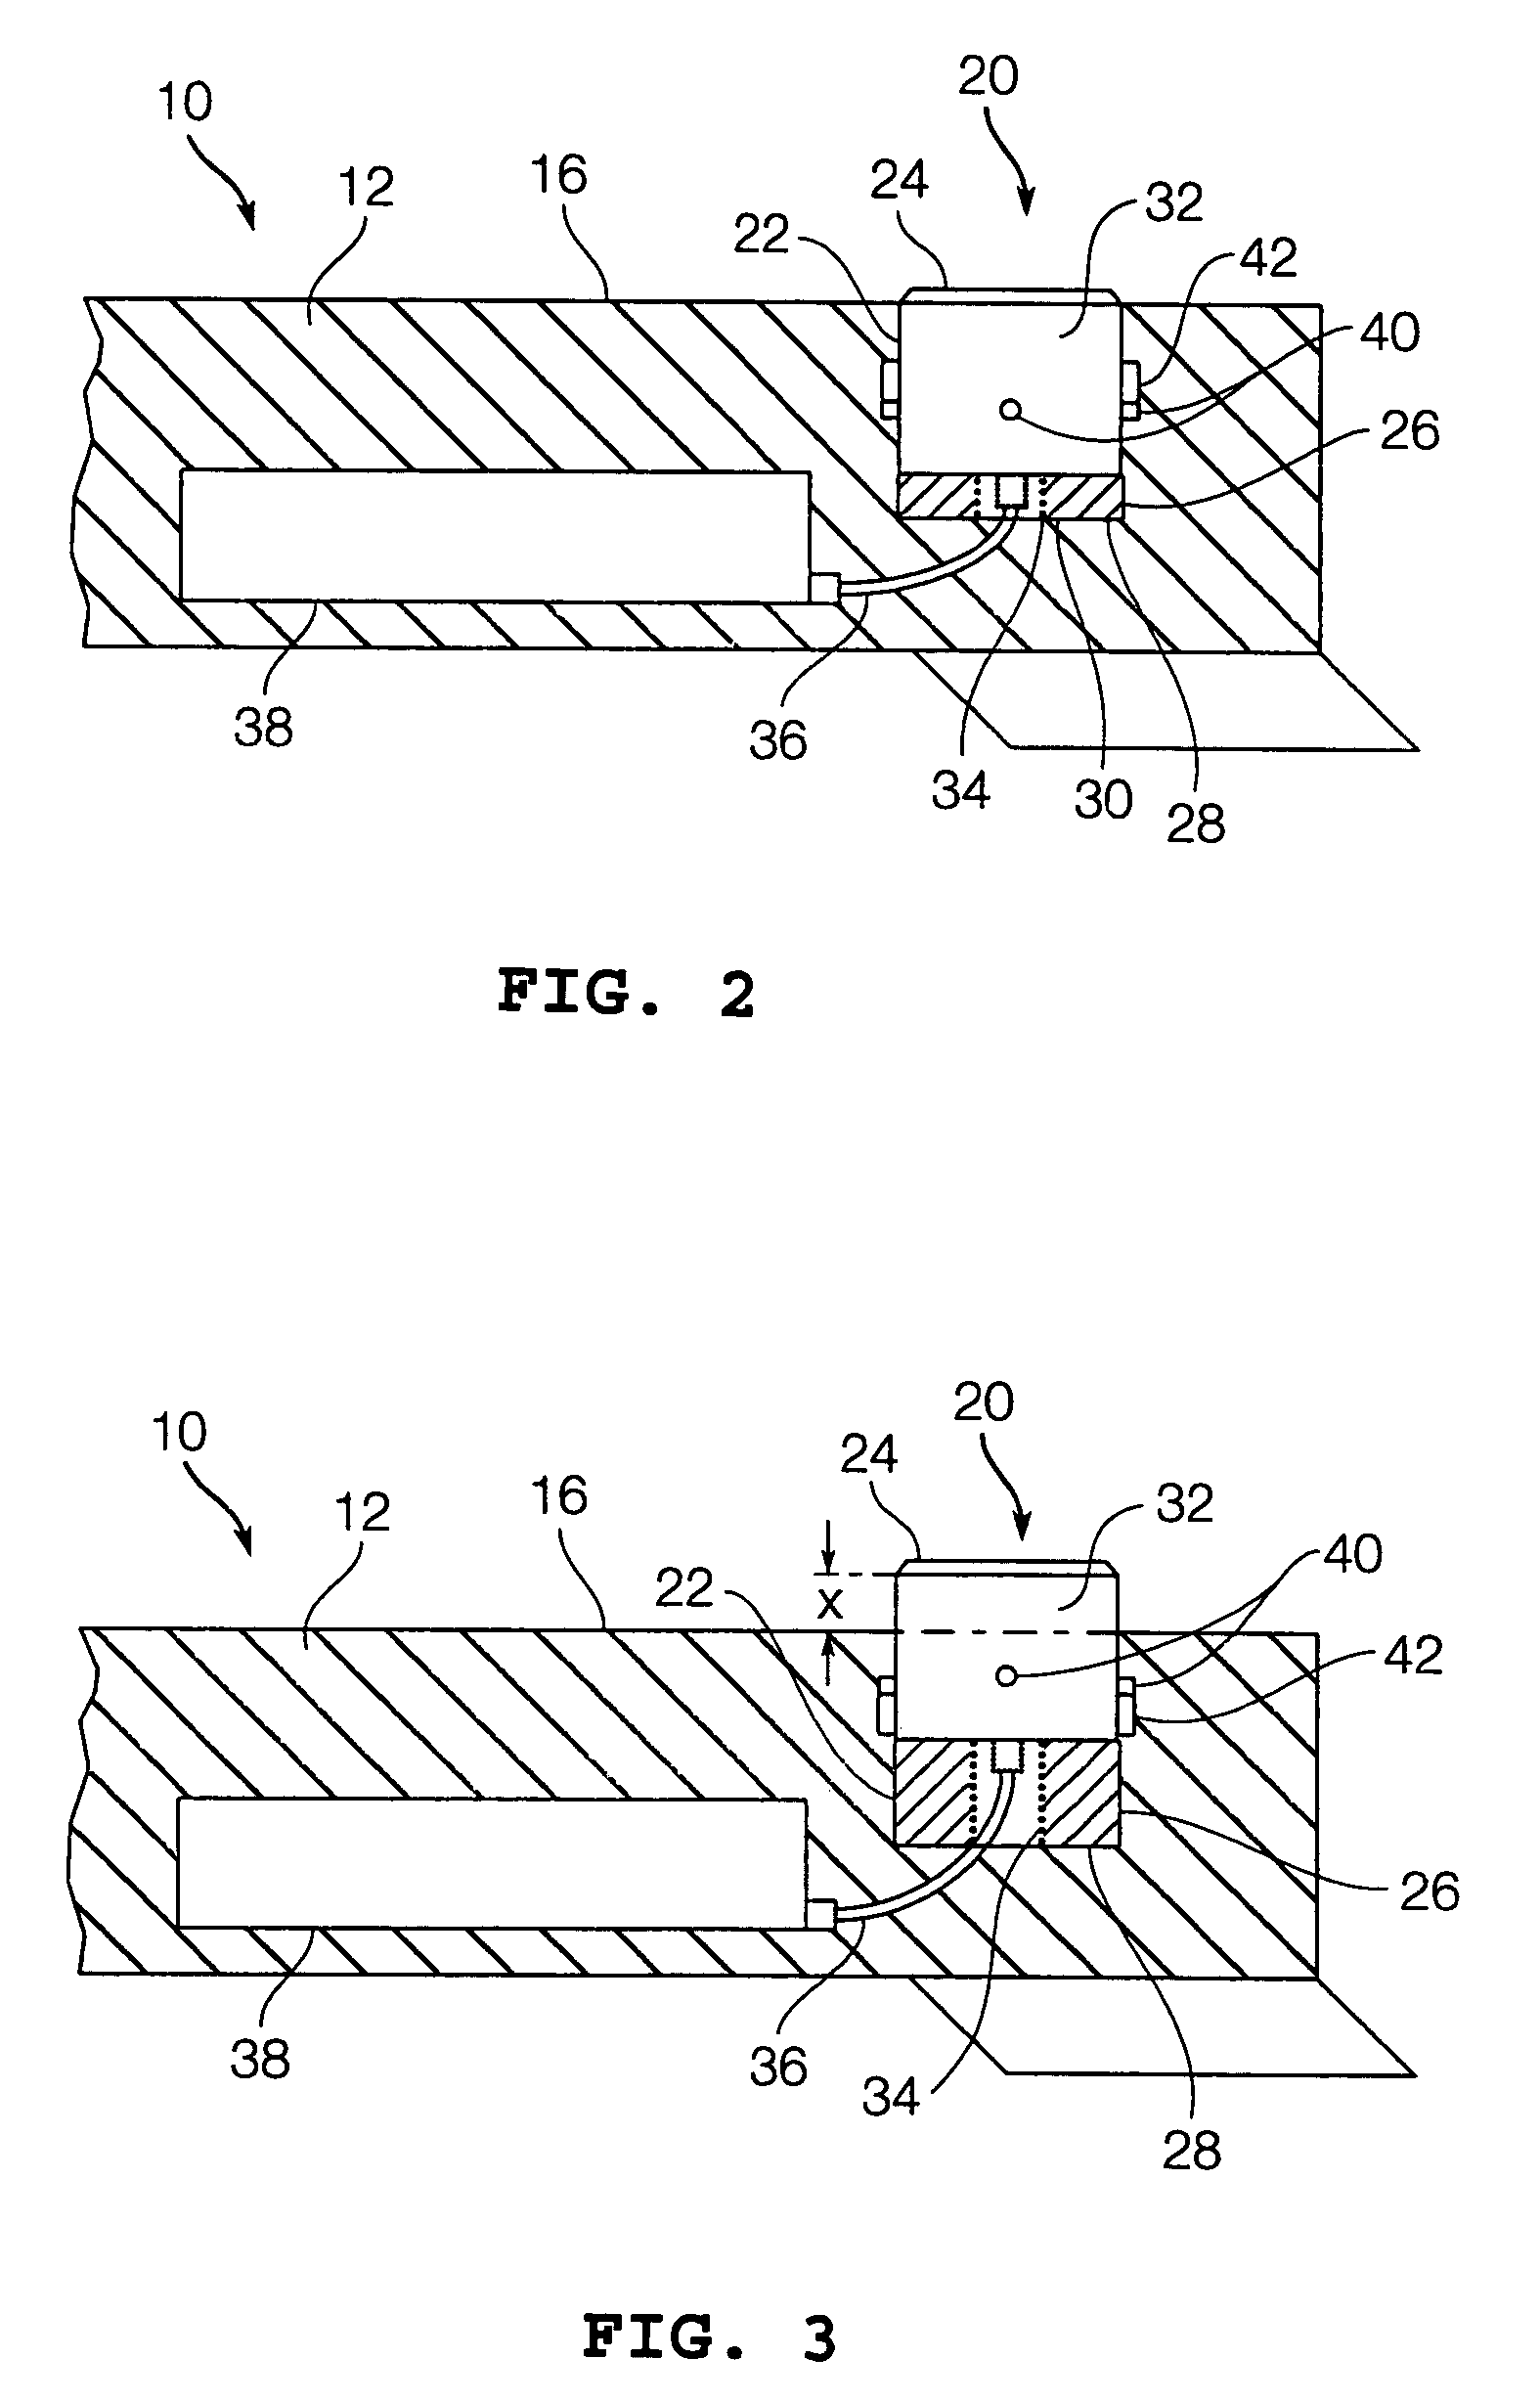 Antenna linear extension and retraction apparatus for a submersible device, and method of use